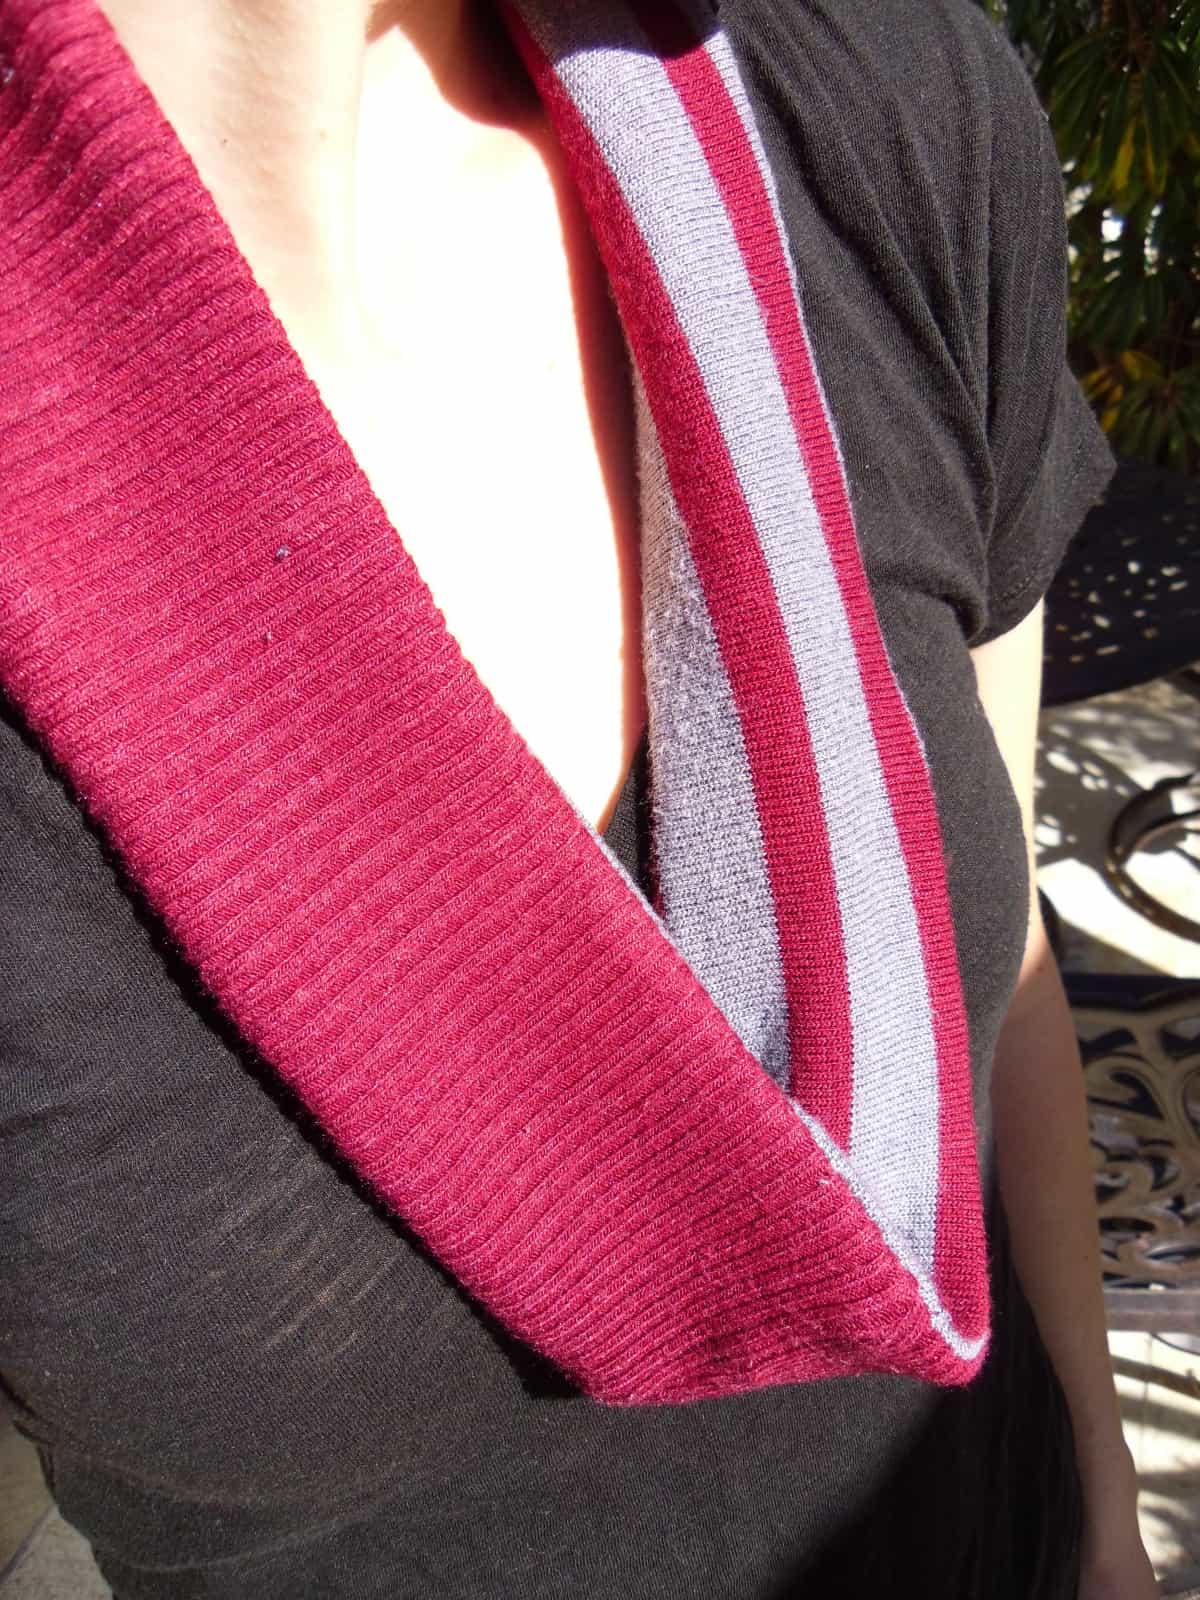 Infinity scarf from an old sweater